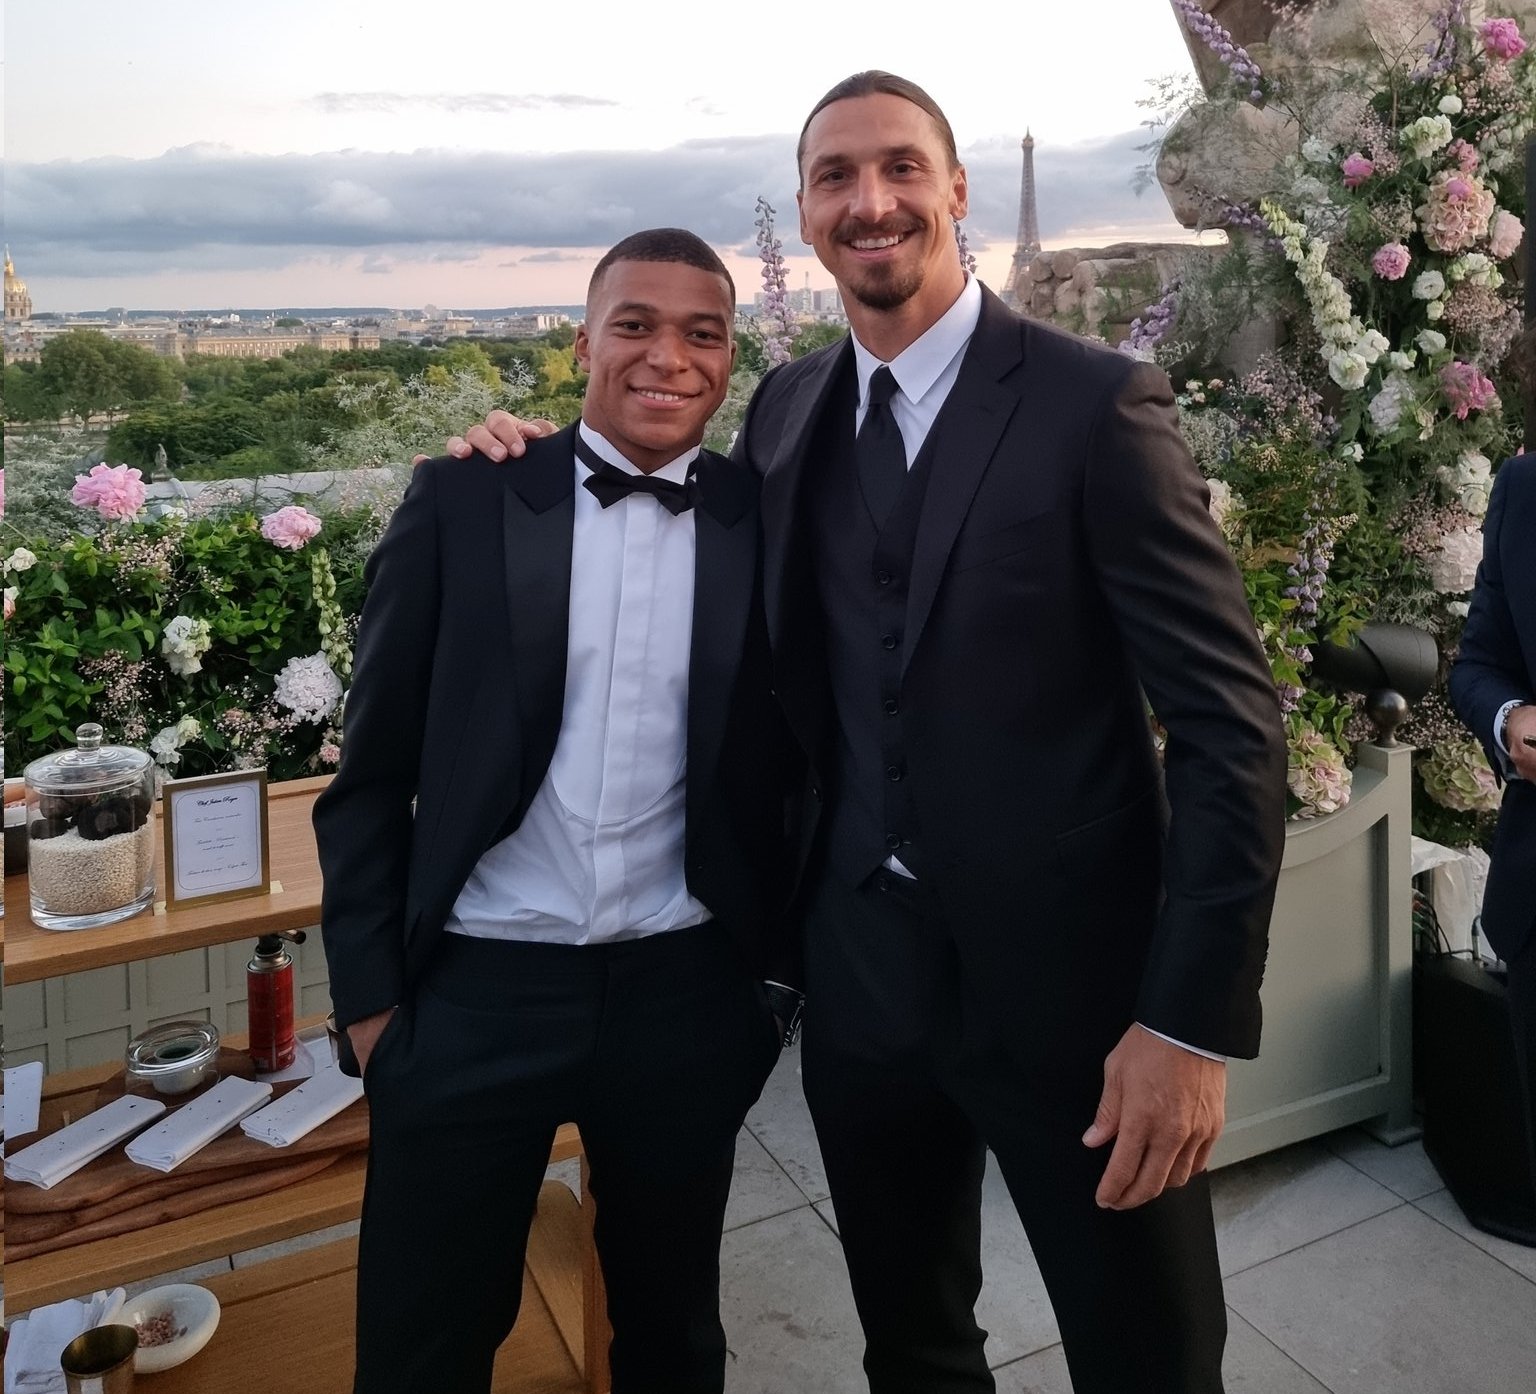 In this undated photo, PSG's Kylian Mbappe (L) poses with AC Milan's Zlatan Ibrahimovic. (Zlatan Ibrahimovic on Twitter)